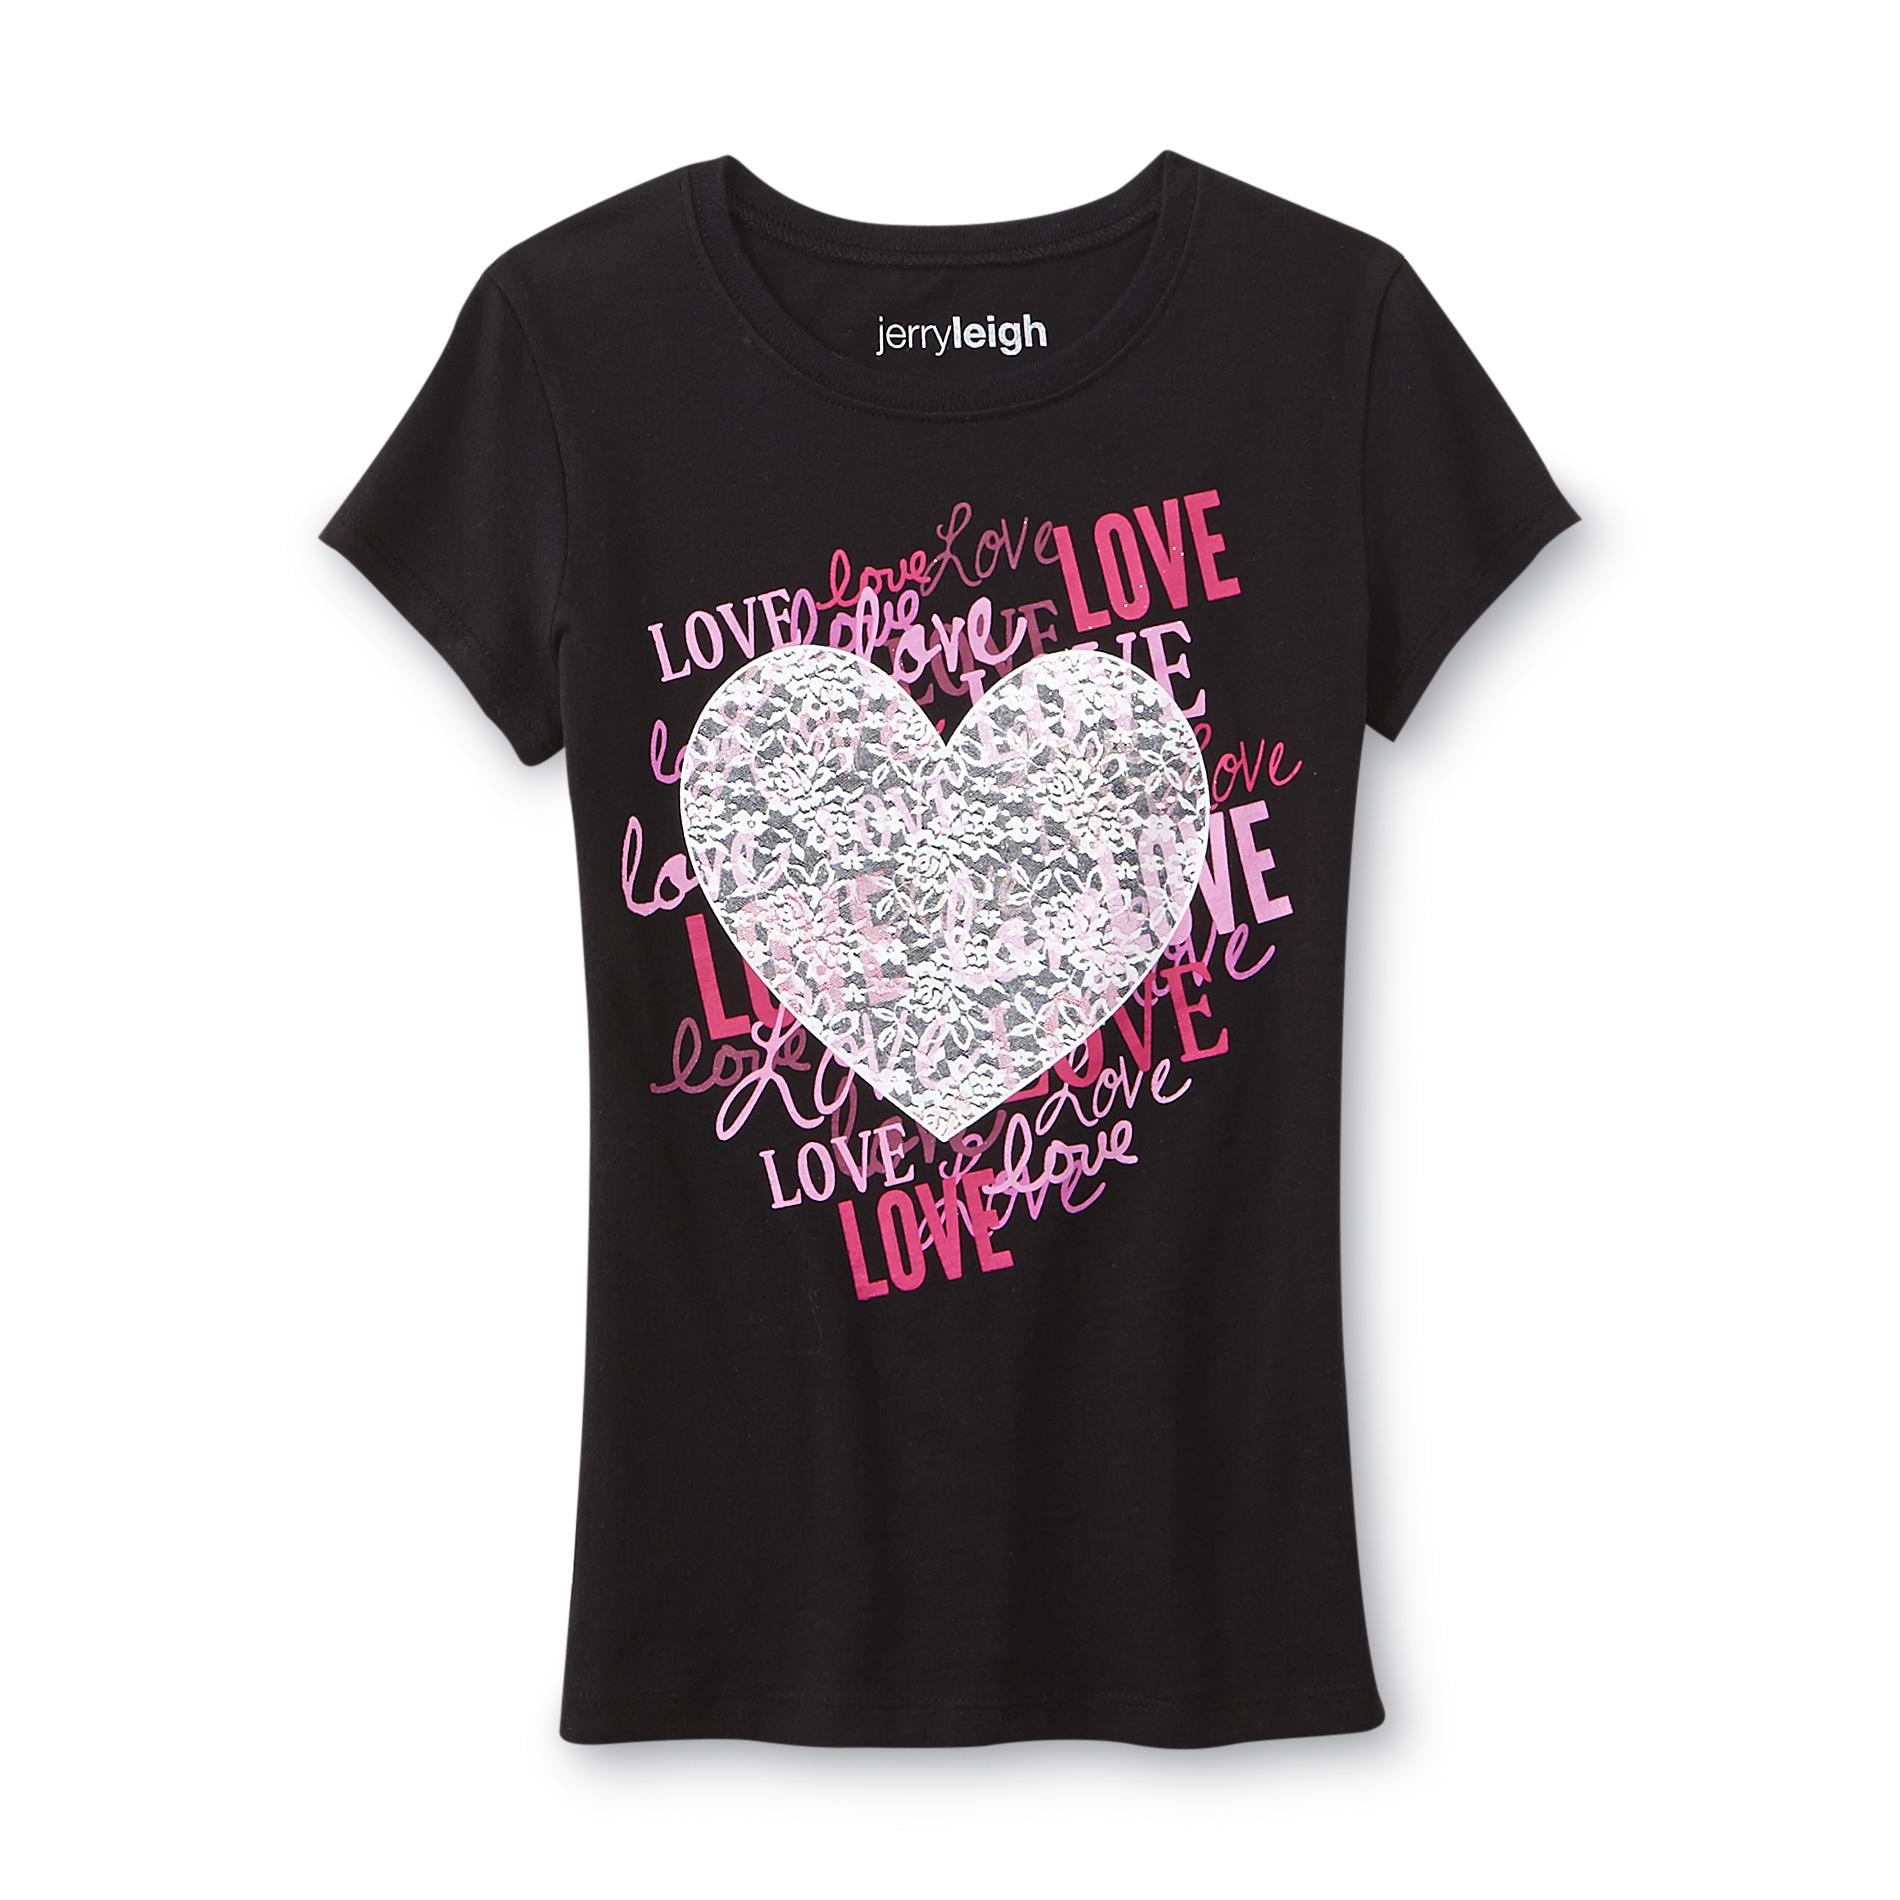 Jerry Leigh Girl's Graphic T-Shirt - Love & Lace Heart